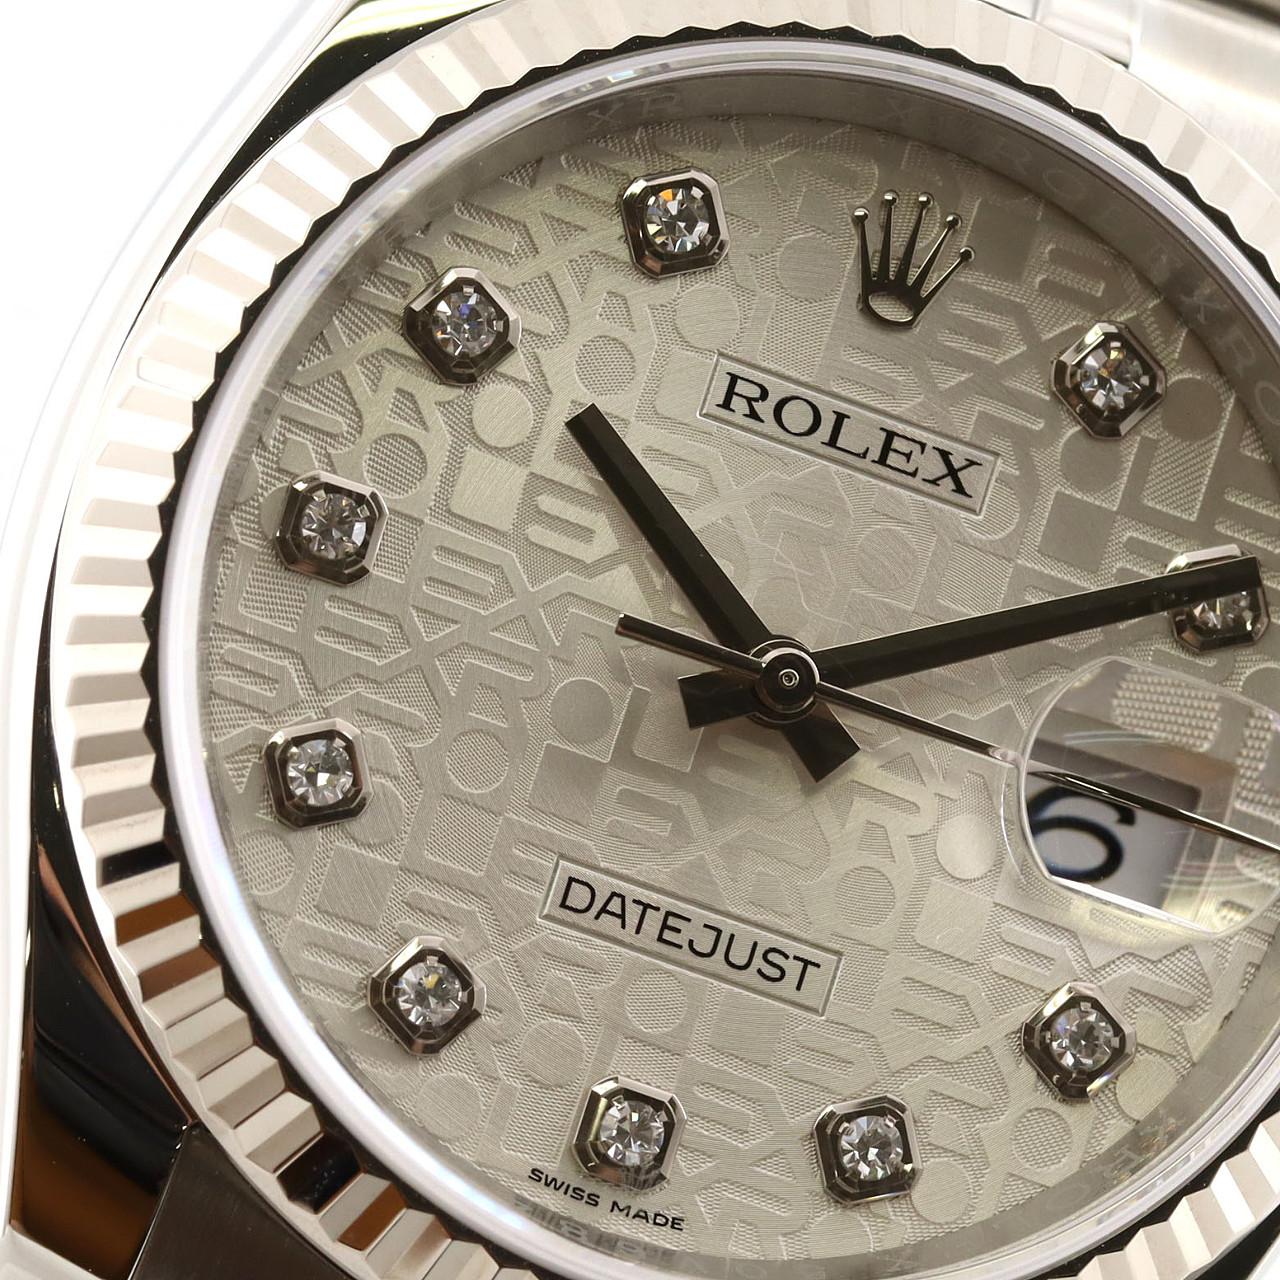 ROLEX Datejust 116234G SSxWG Automatic random number